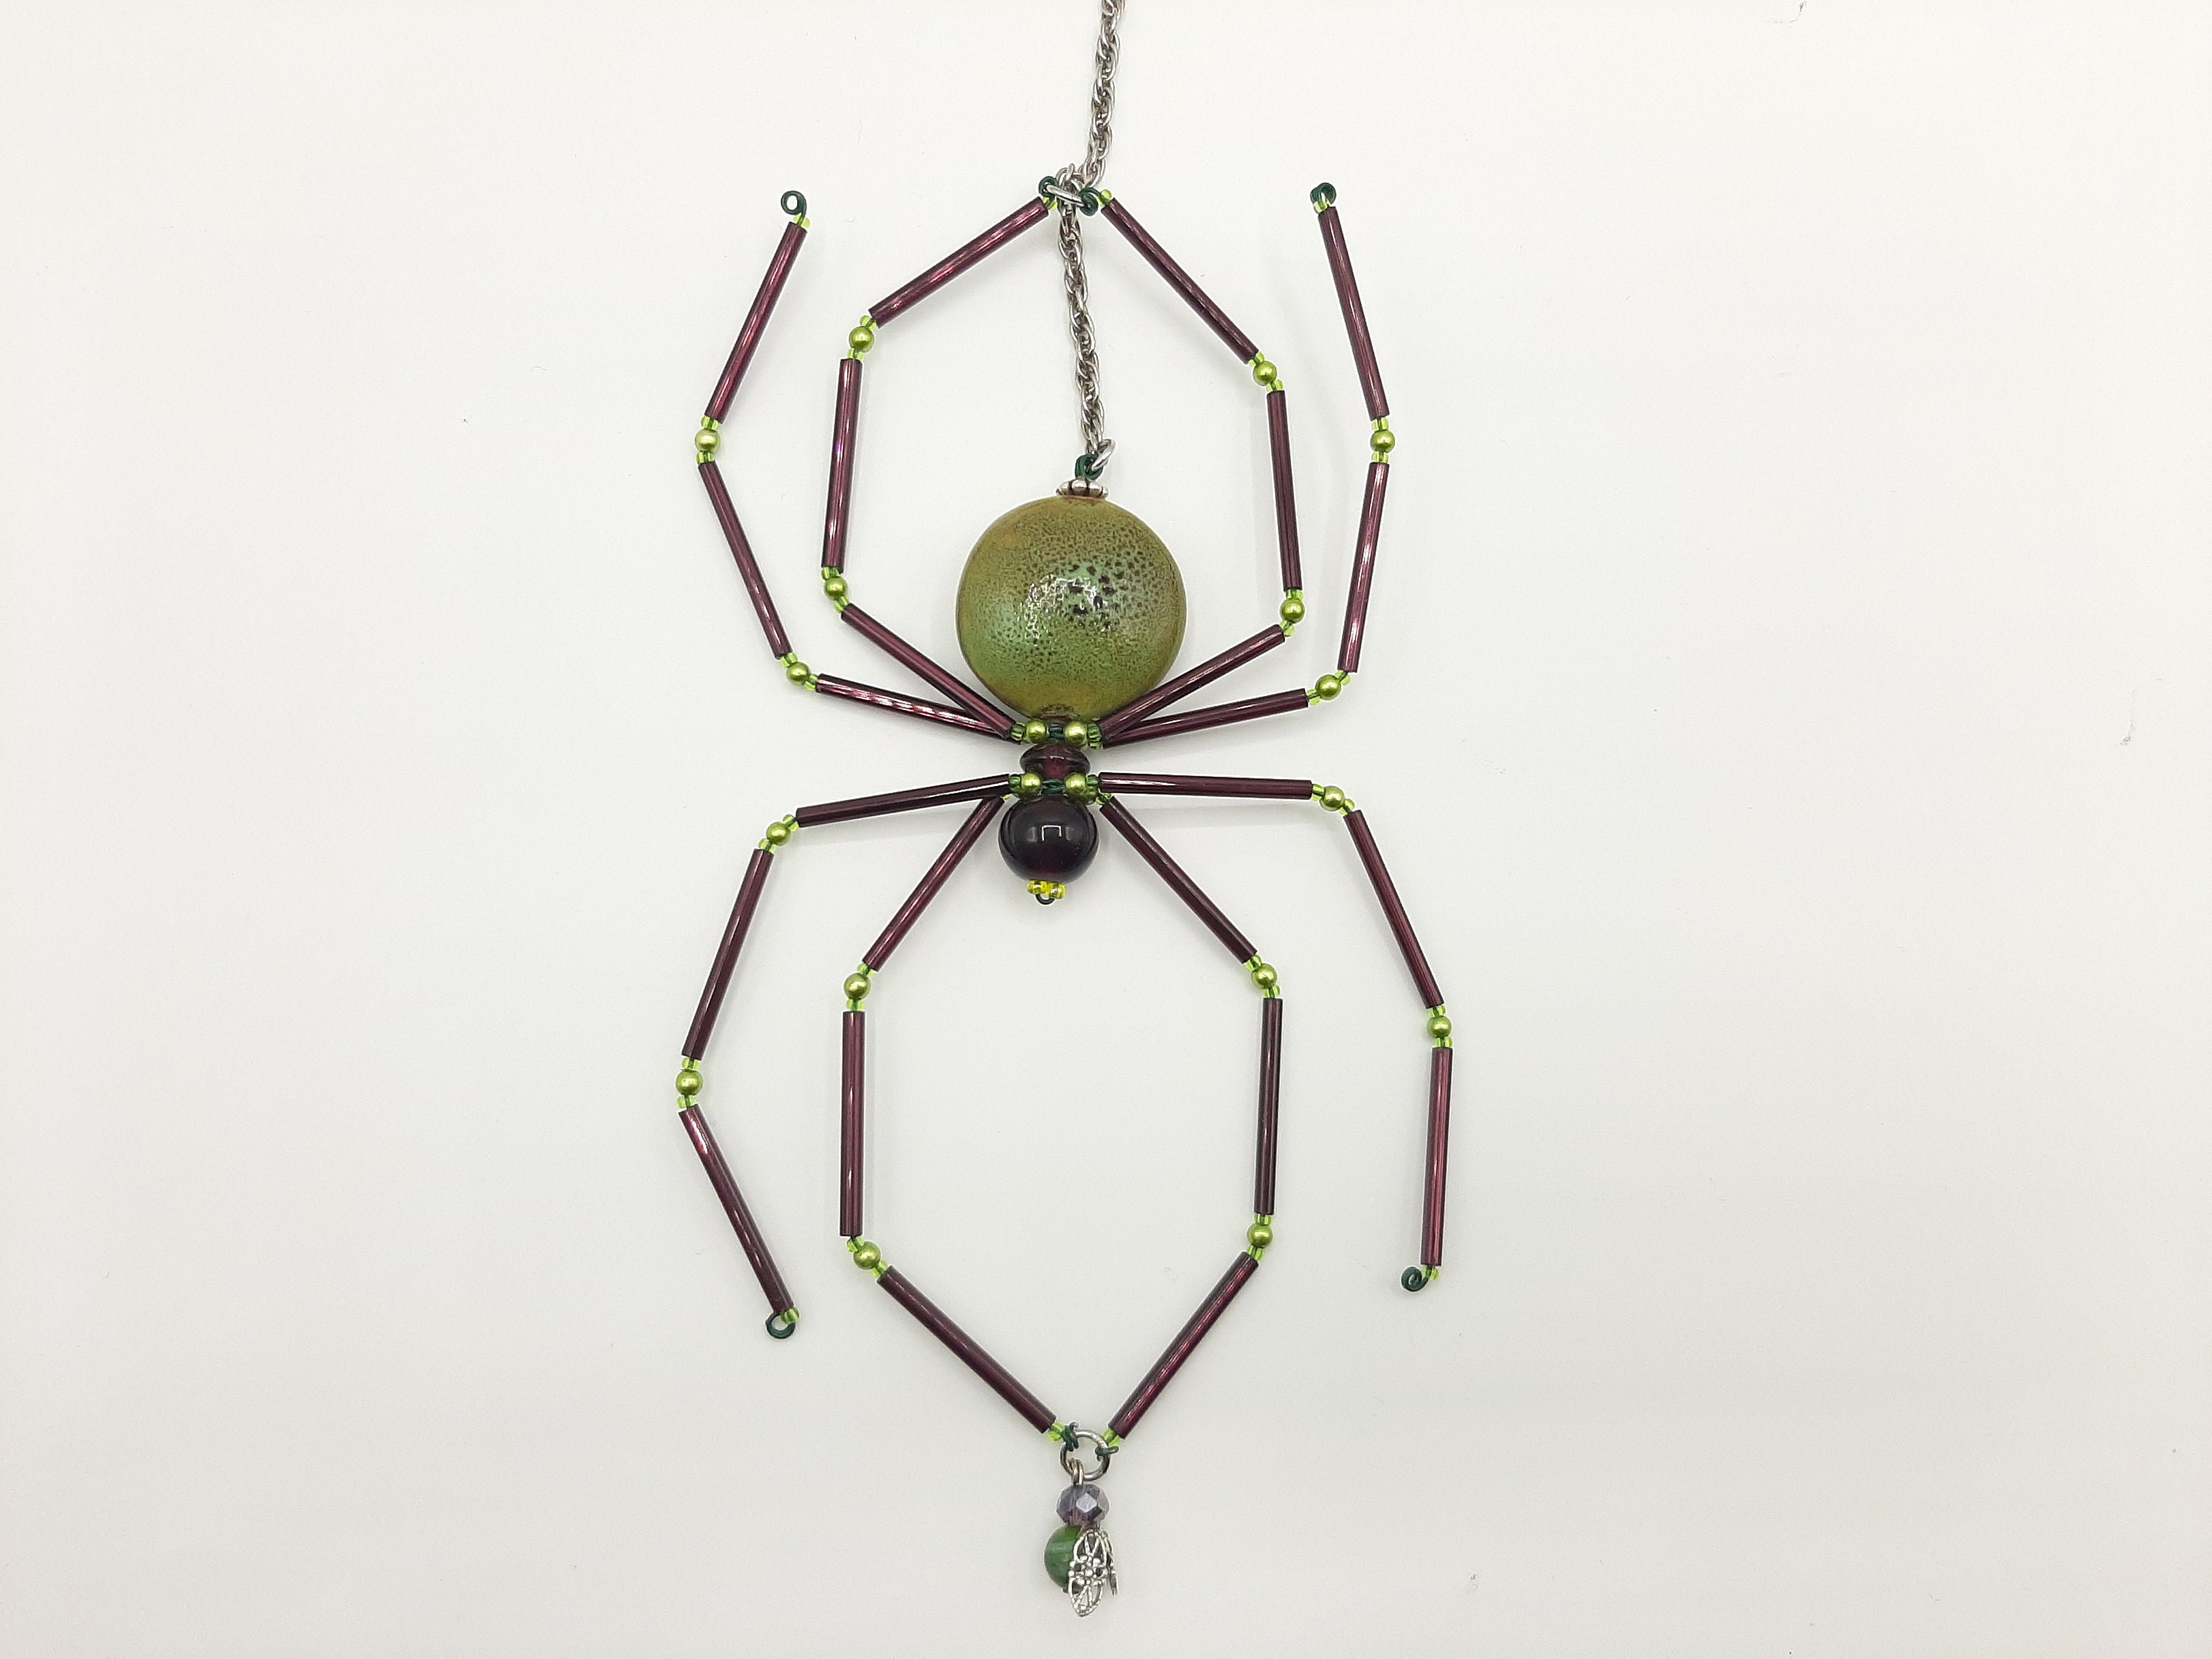 Window Hanging Window Decoration Gothic Home Decor Spider Ornament Christmas Tree Ornament Spider Christmas Ornament